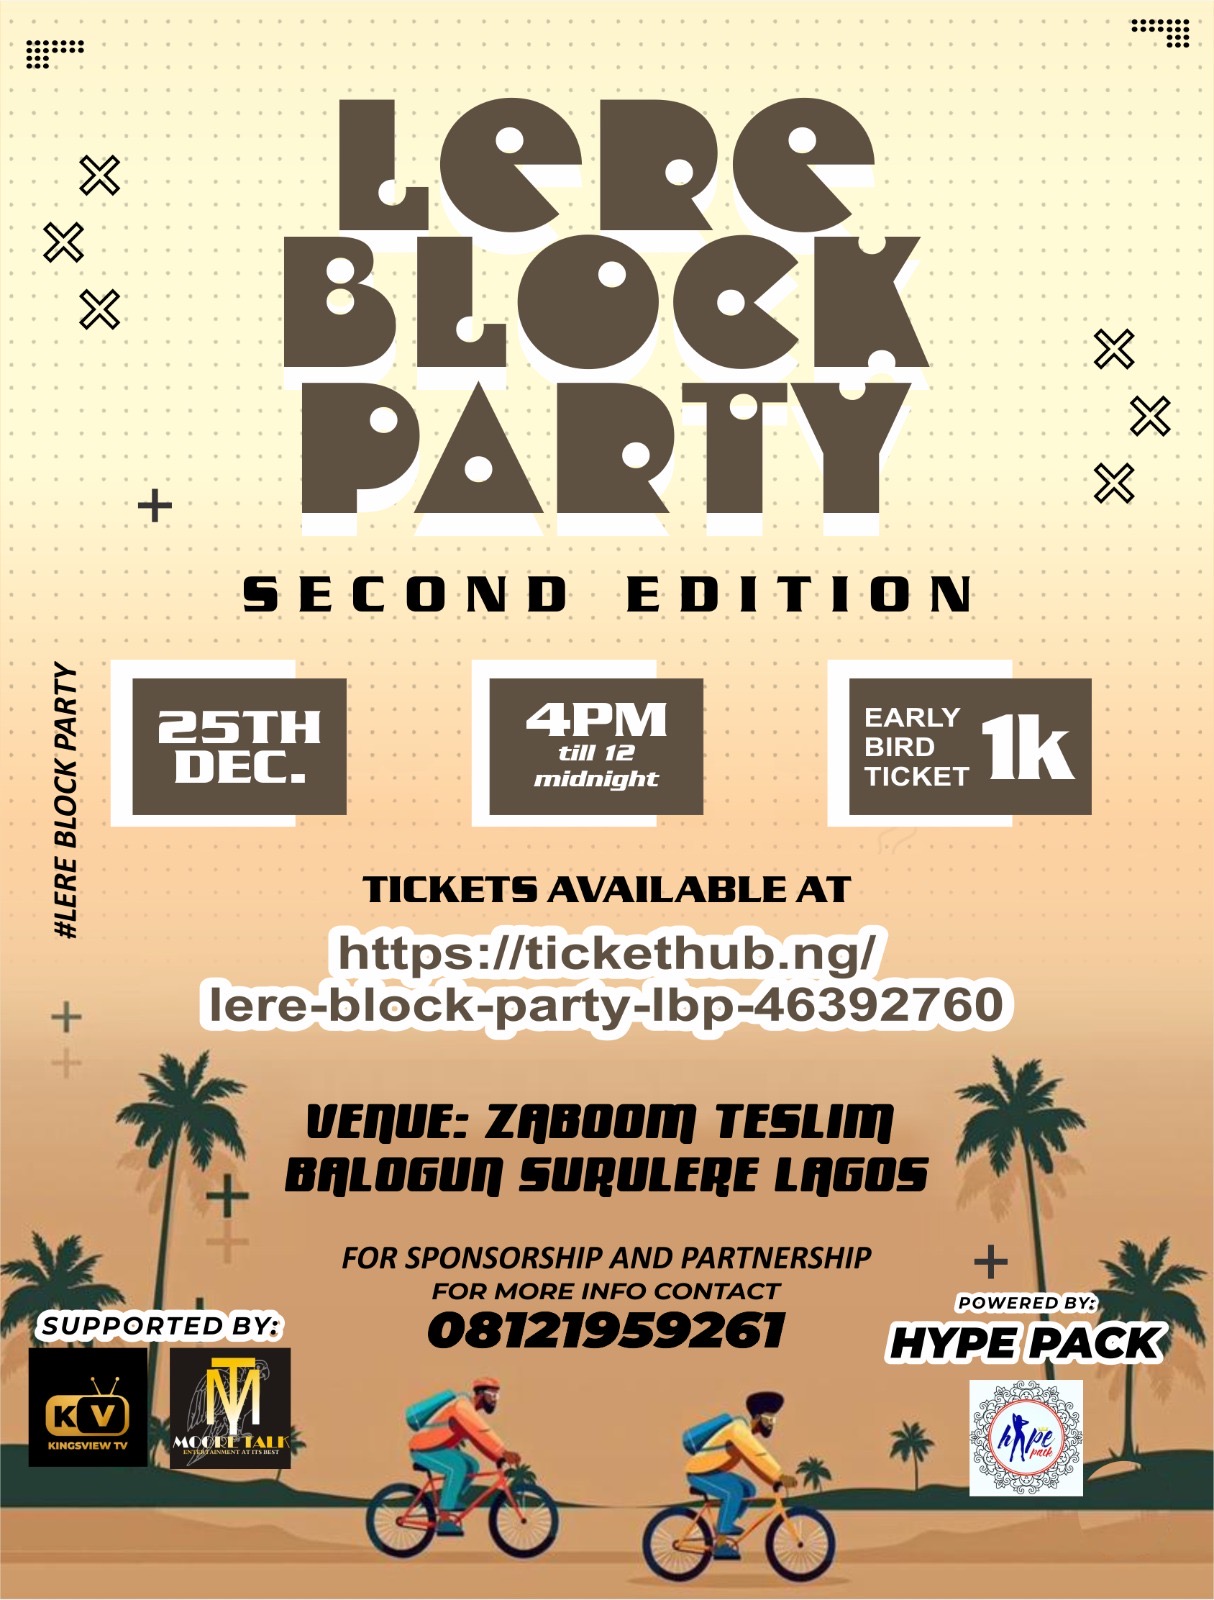 LERE BLOCK PARTY LBP Post free event in Nigeria using tickethub.ng, buy and sell tickets to event